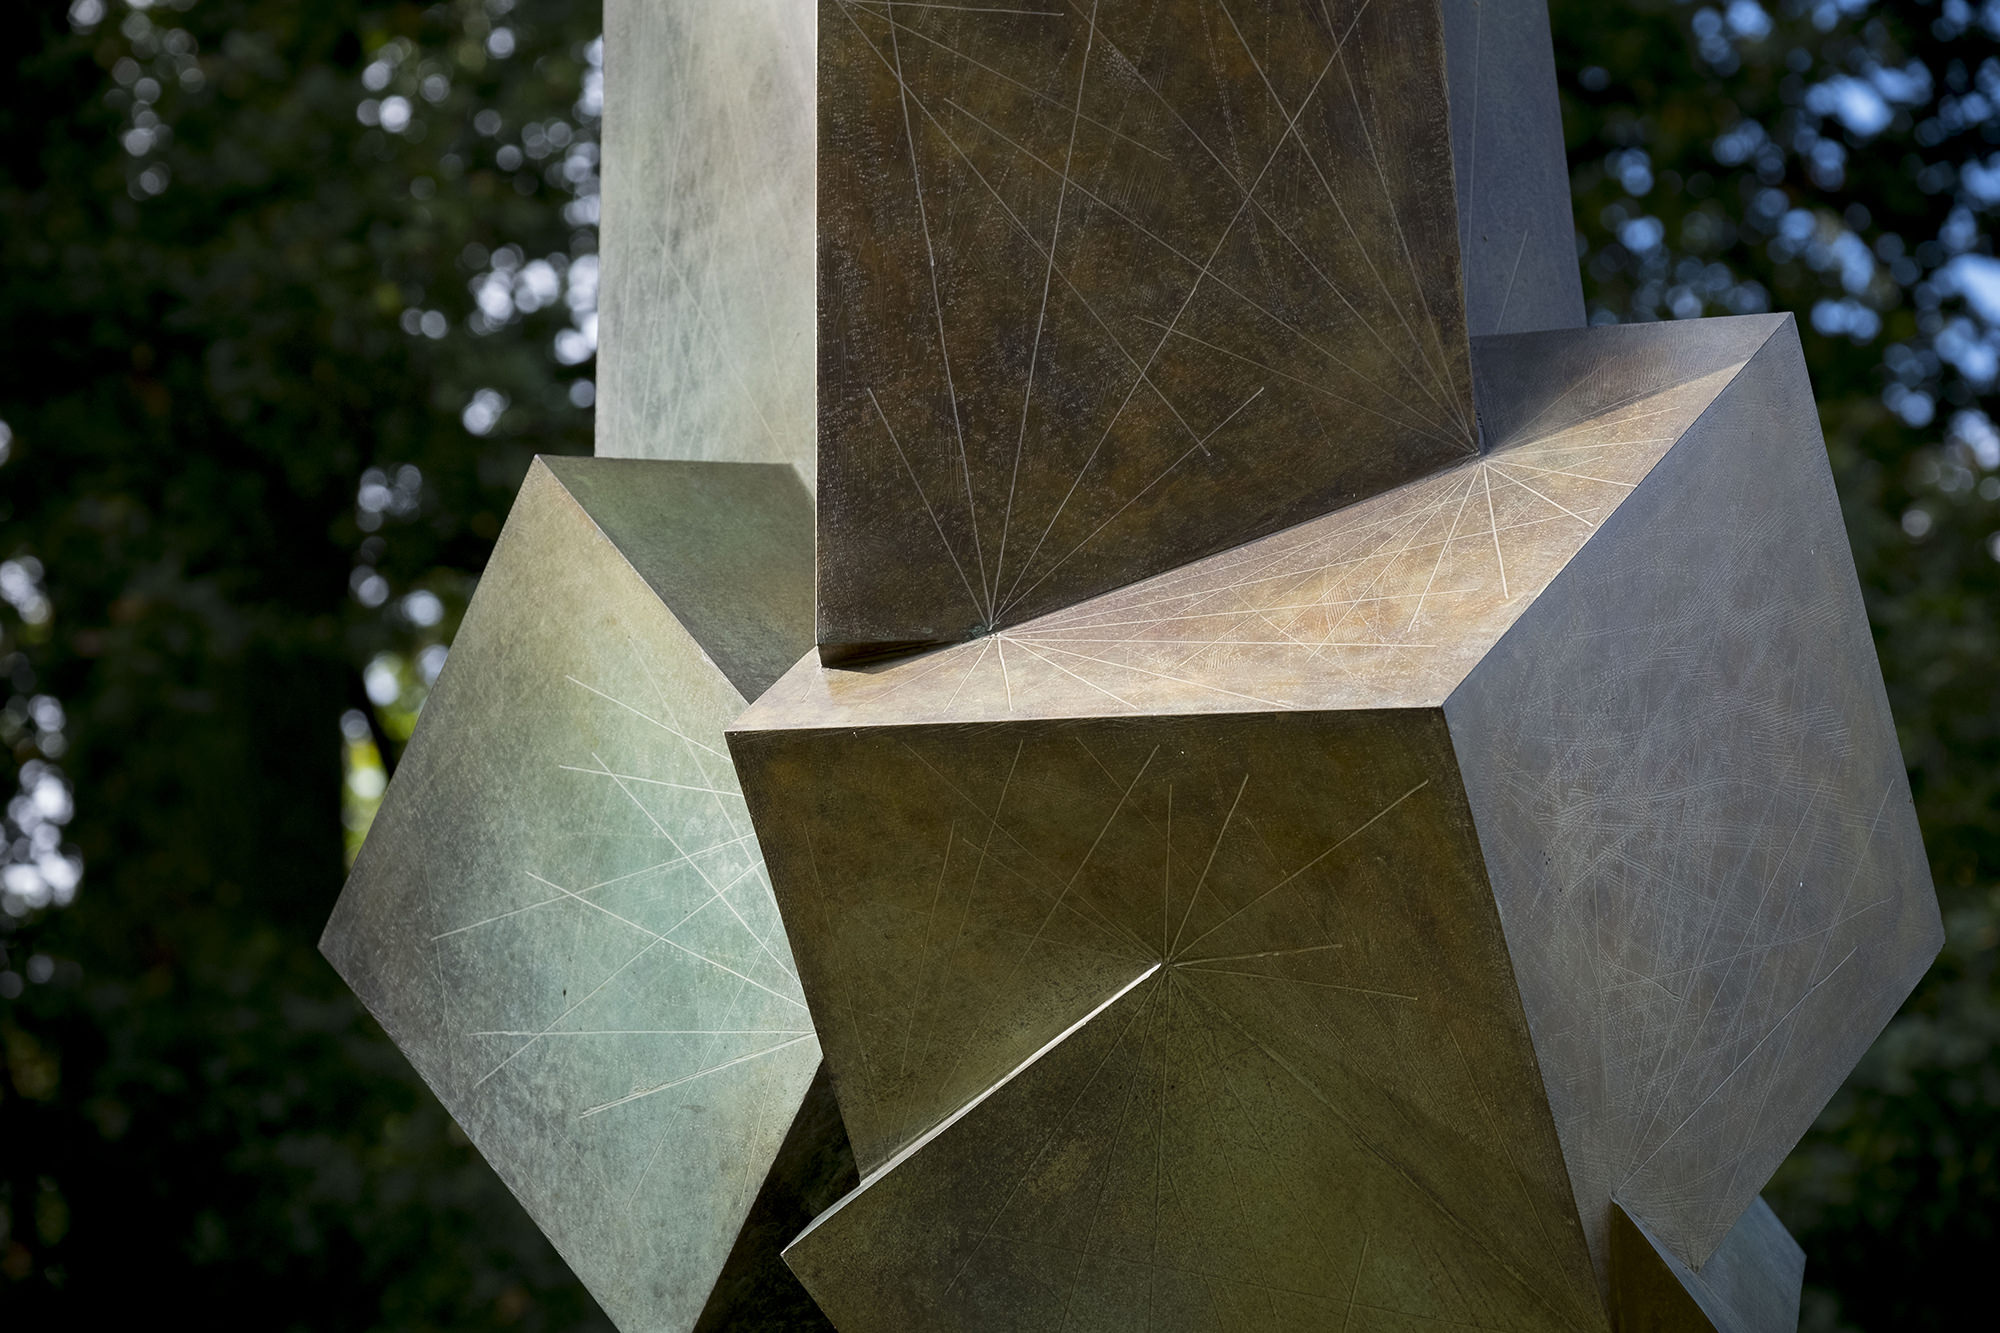 Bruce Beasley Advocate IV 1998, at Yorkshire Sculpture Park